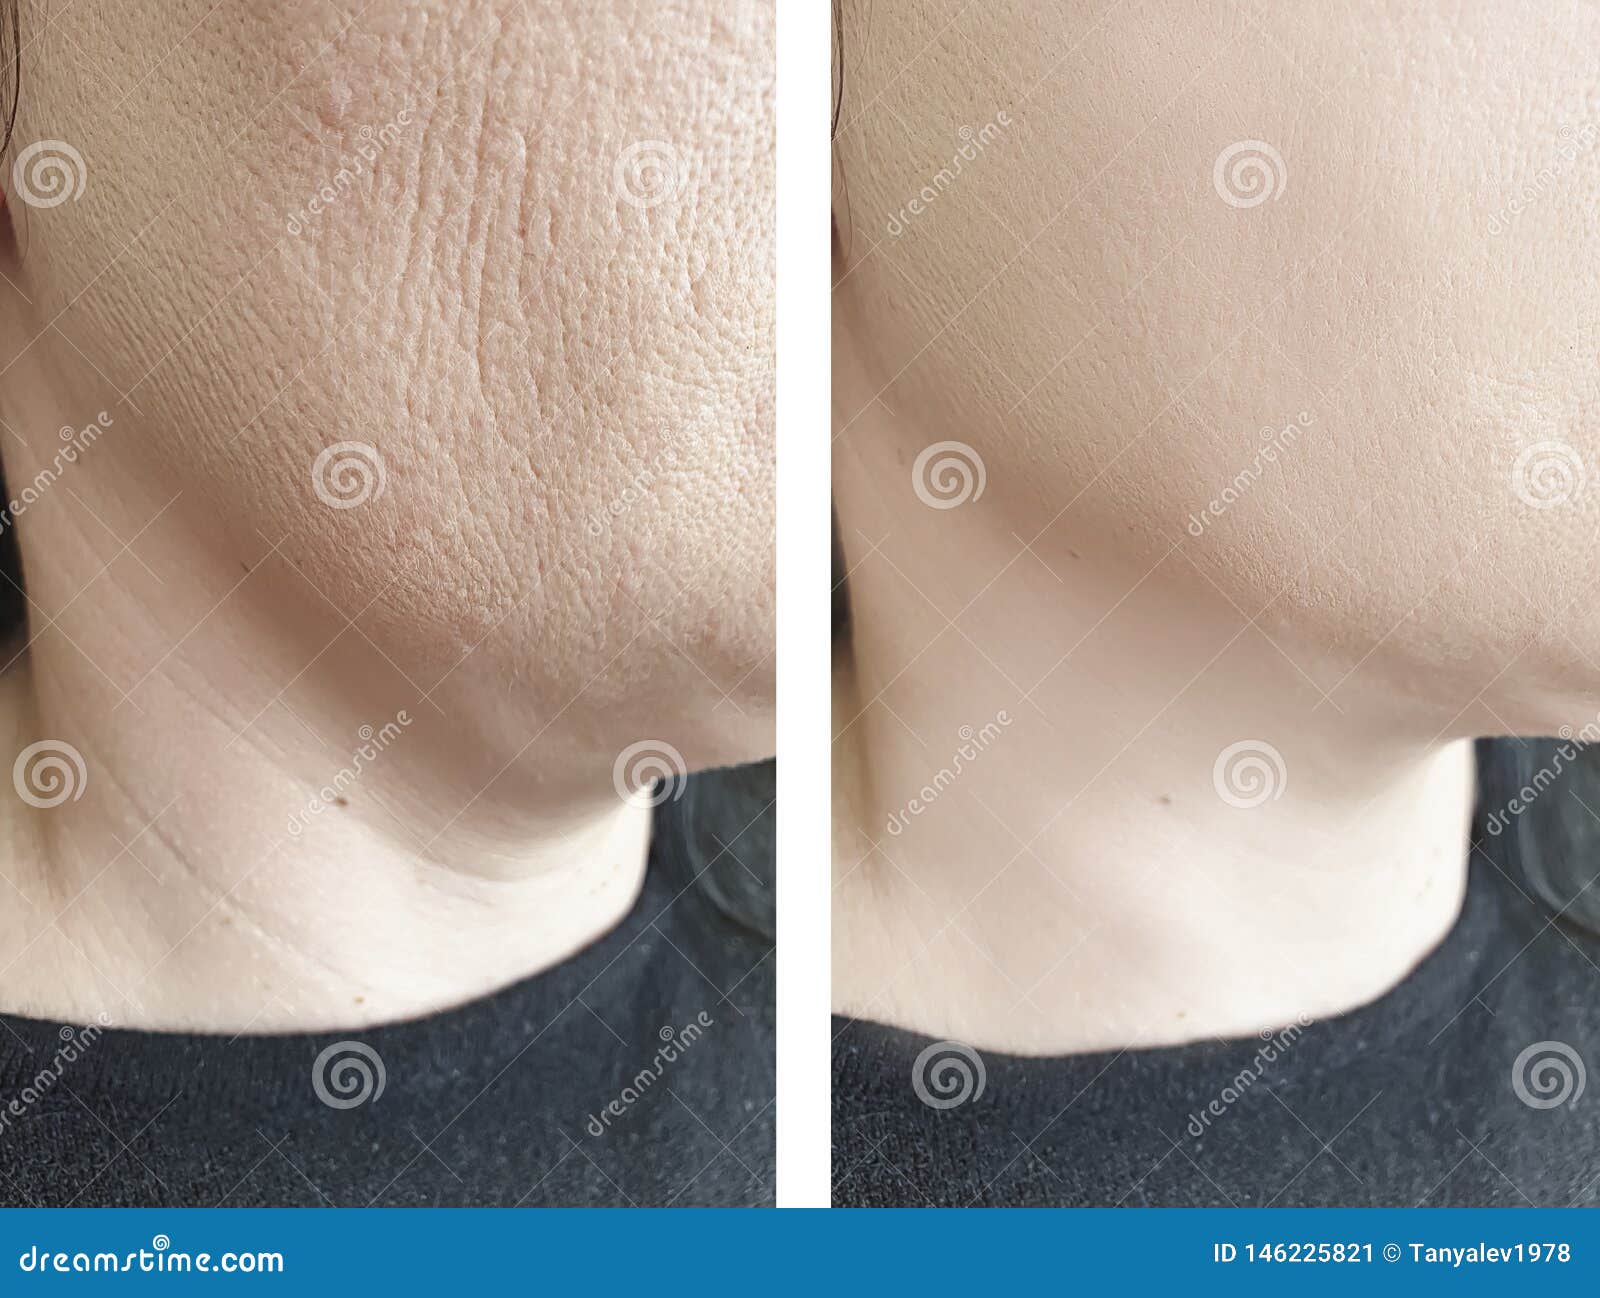 woman  elderlyface wrinkles before and after lifting biorevitalization regeneration antiaging treatment